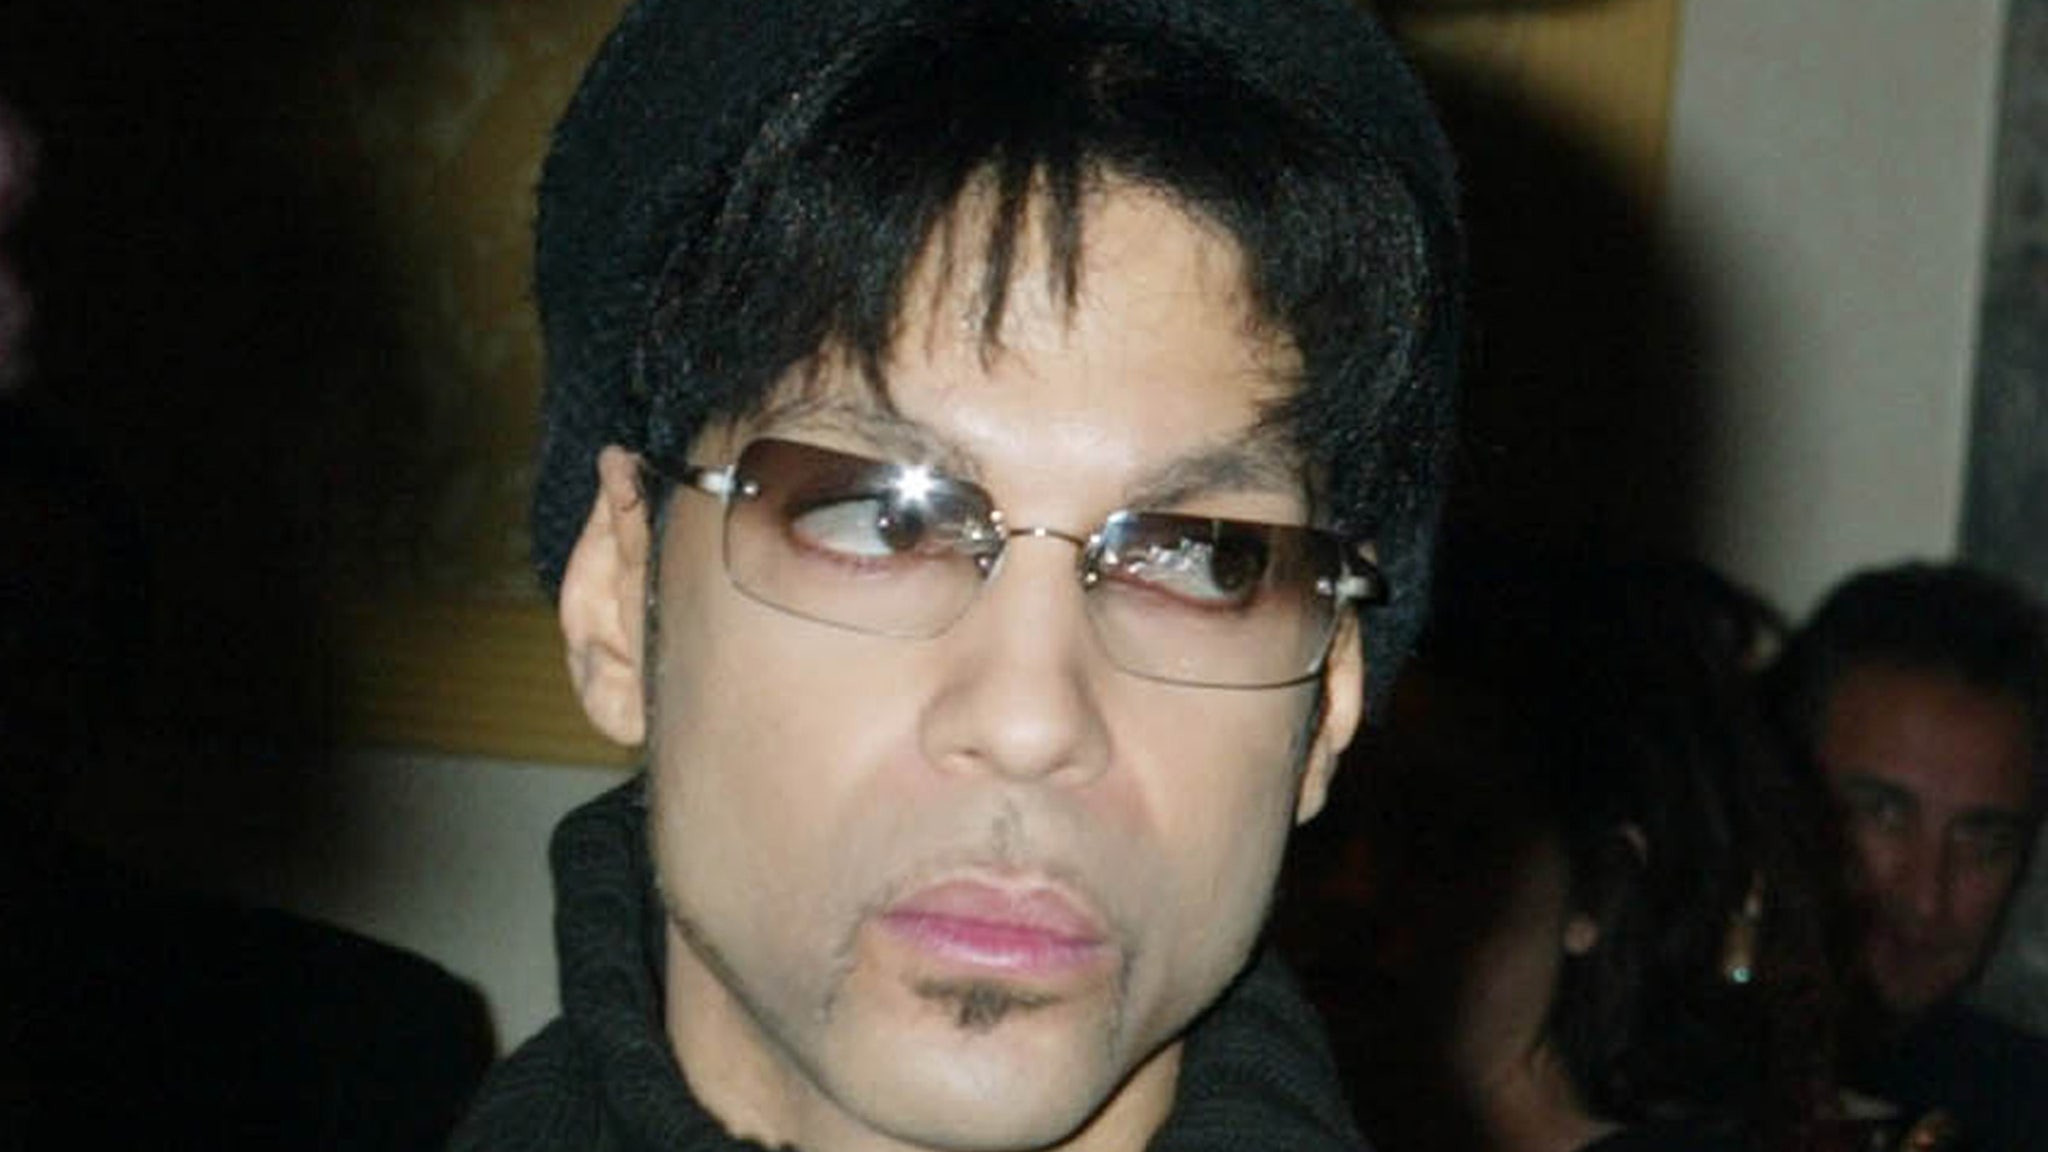 Prince Estate is worth doubling executives’ demands, says IRS